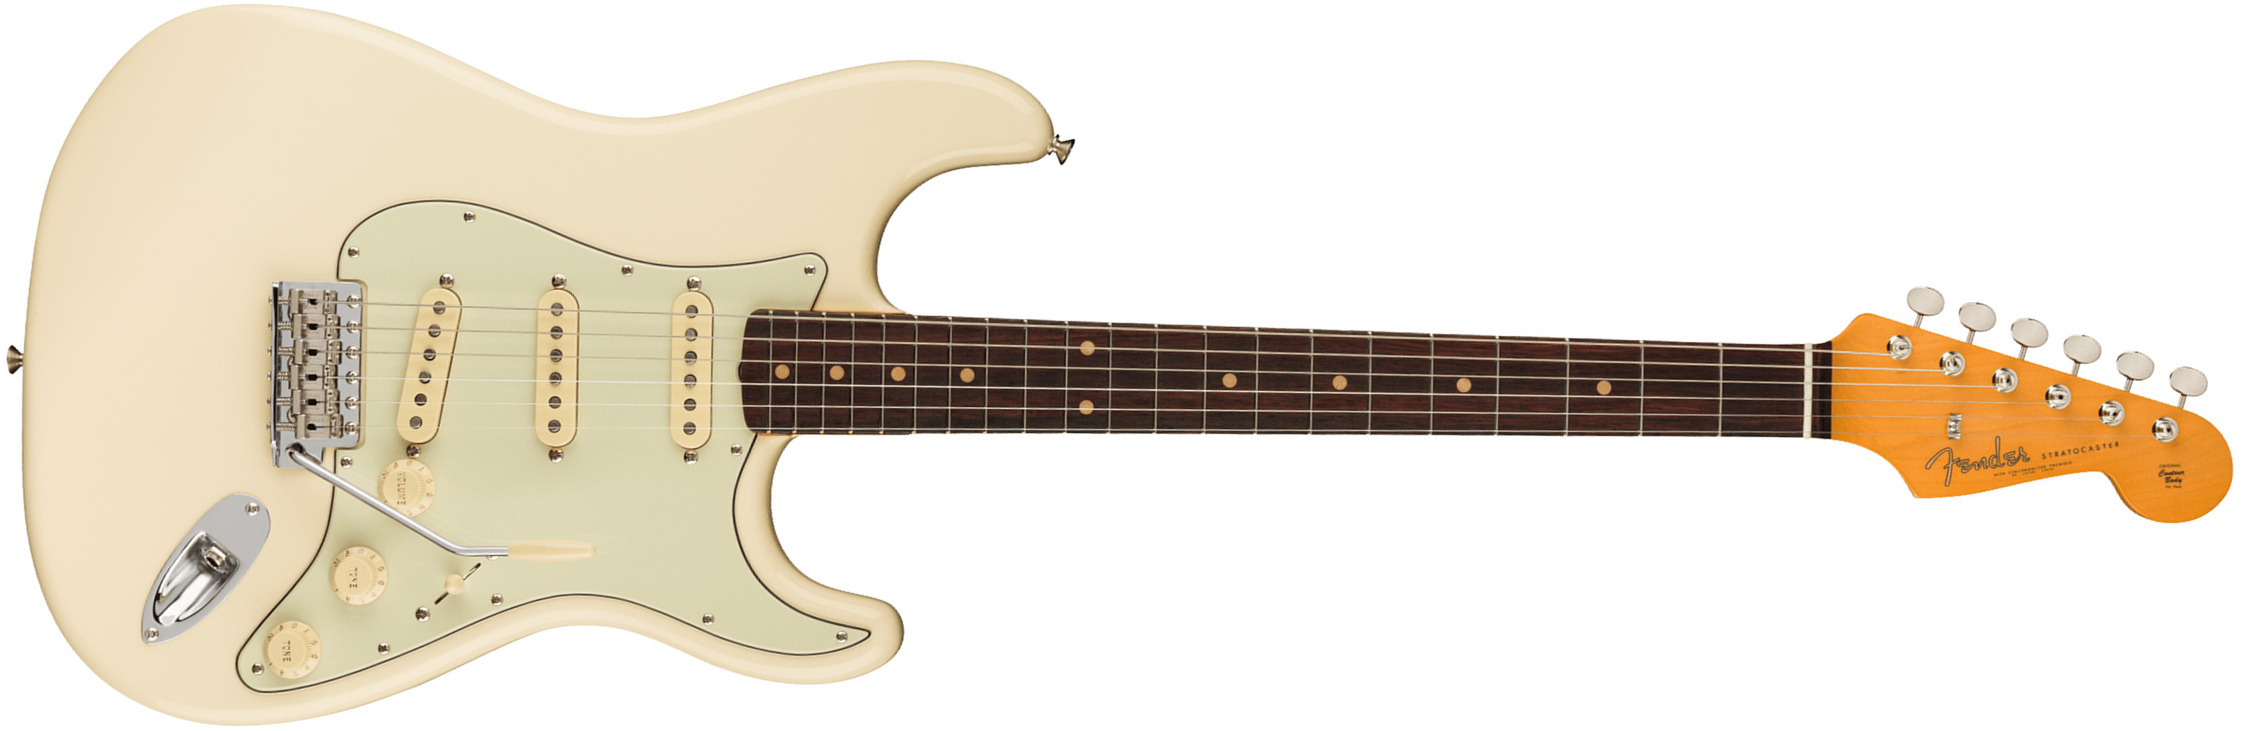 Fender Strat 1961 American Vintage Ii Usa 3s Trem Rw - Olympic White - Str shape electric guitar - Main picture